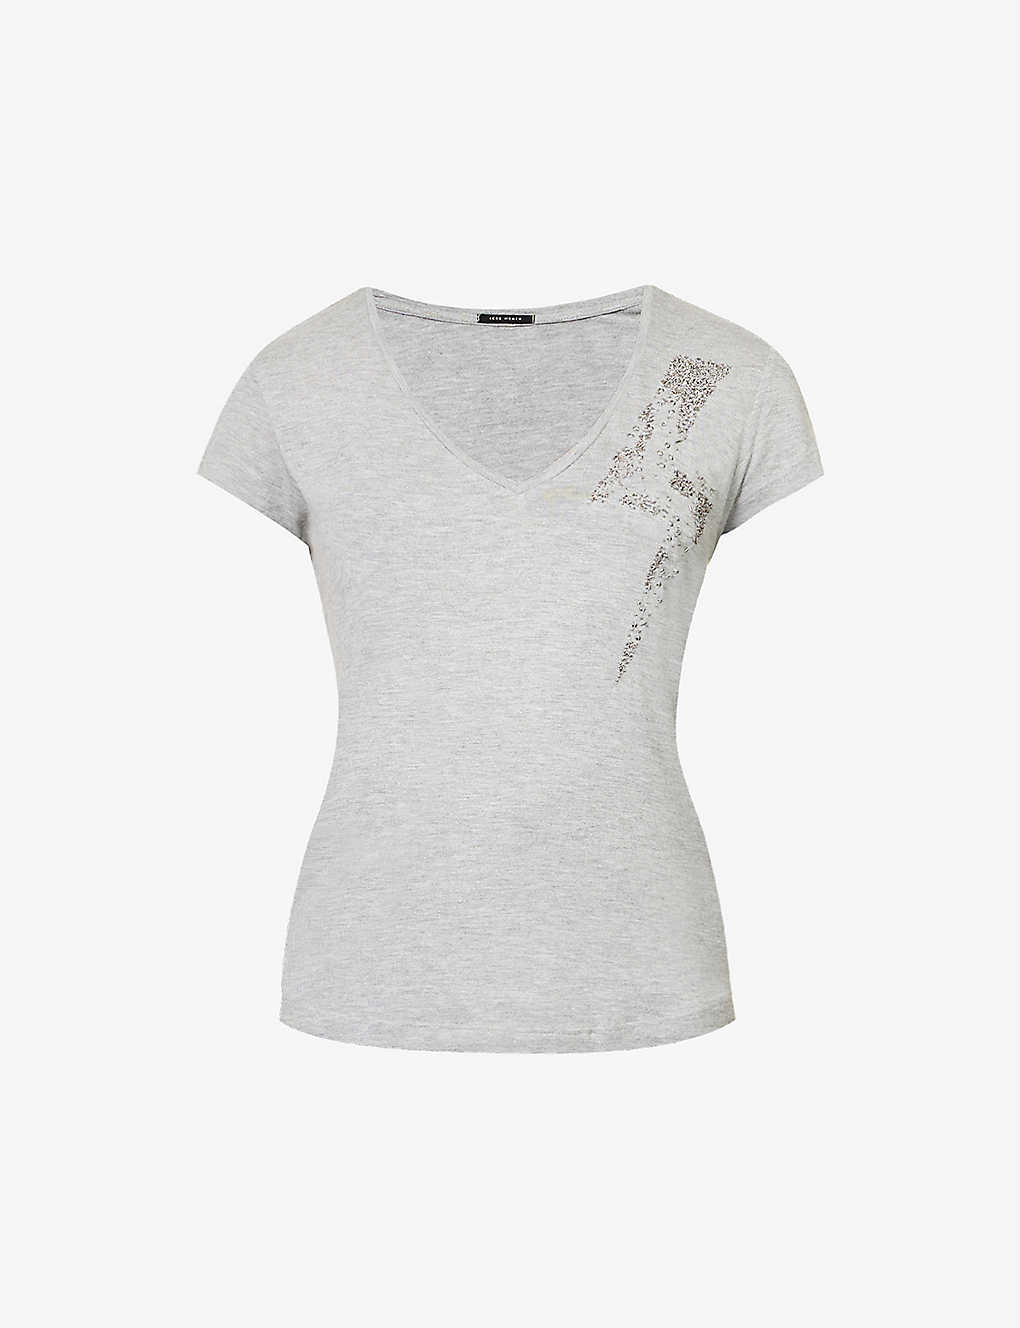 Ikks V-neck Sequin-embroidered Woven T-shirt In Light Grey Chine